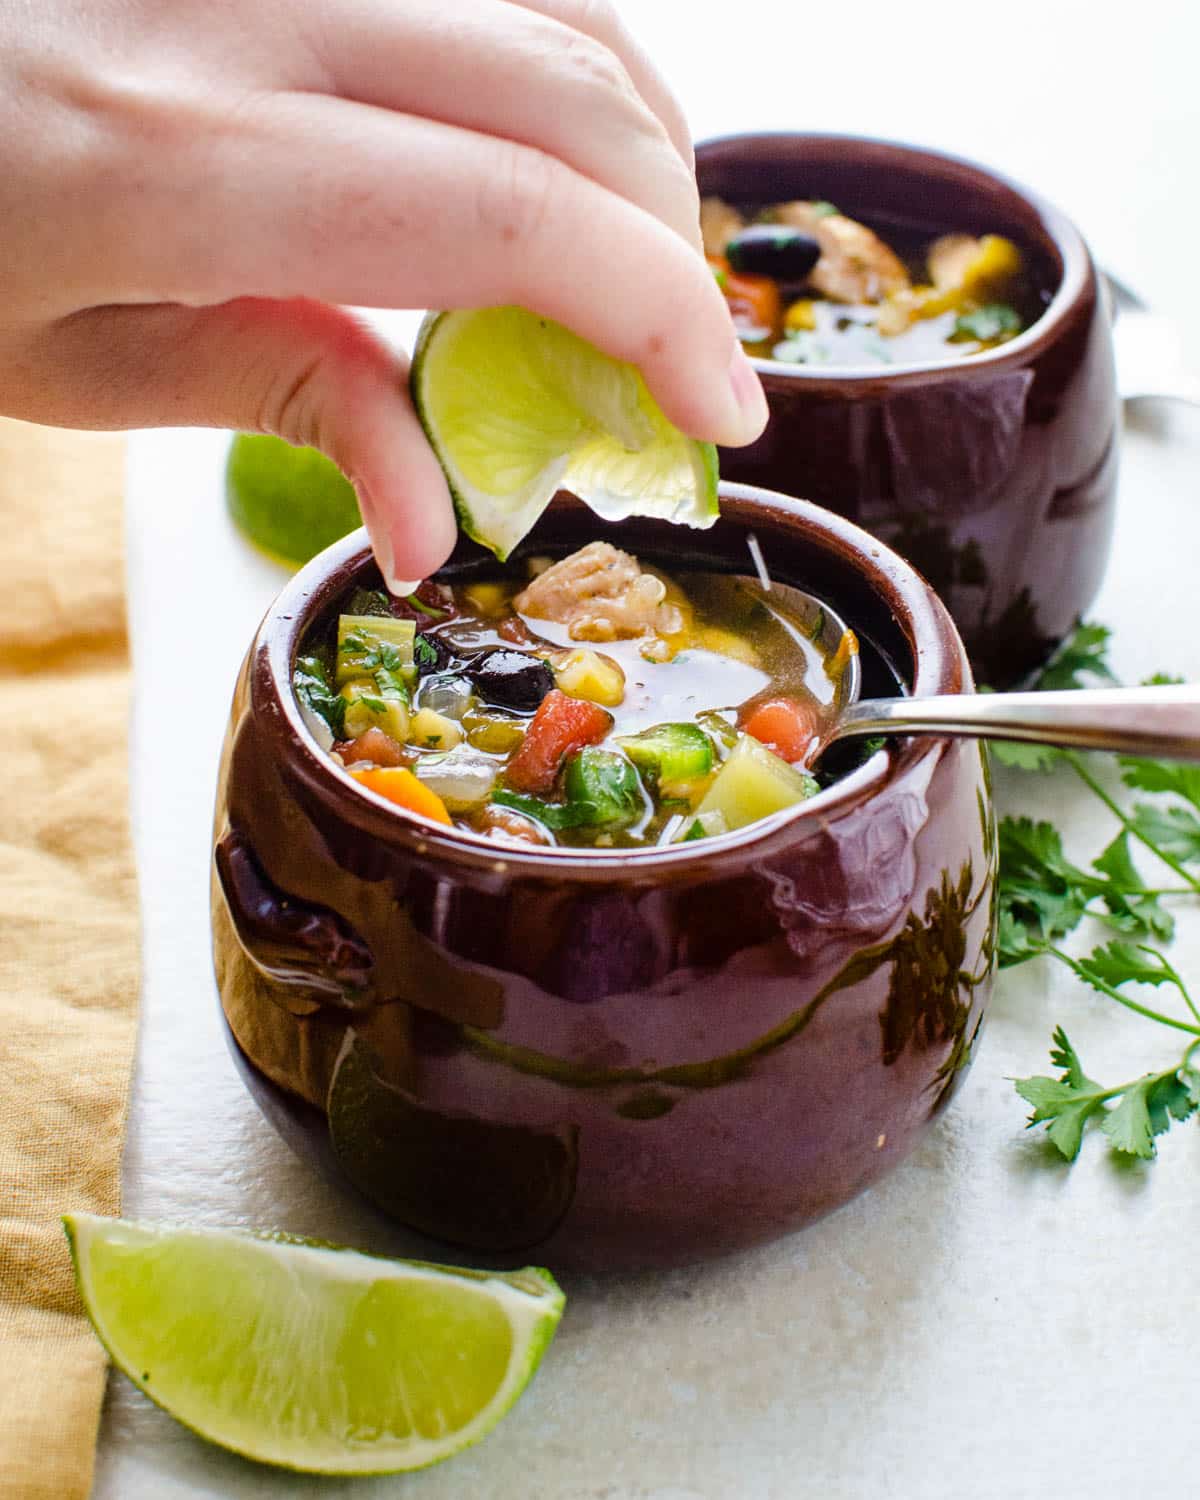 Squeezing fresh lime into the soup.